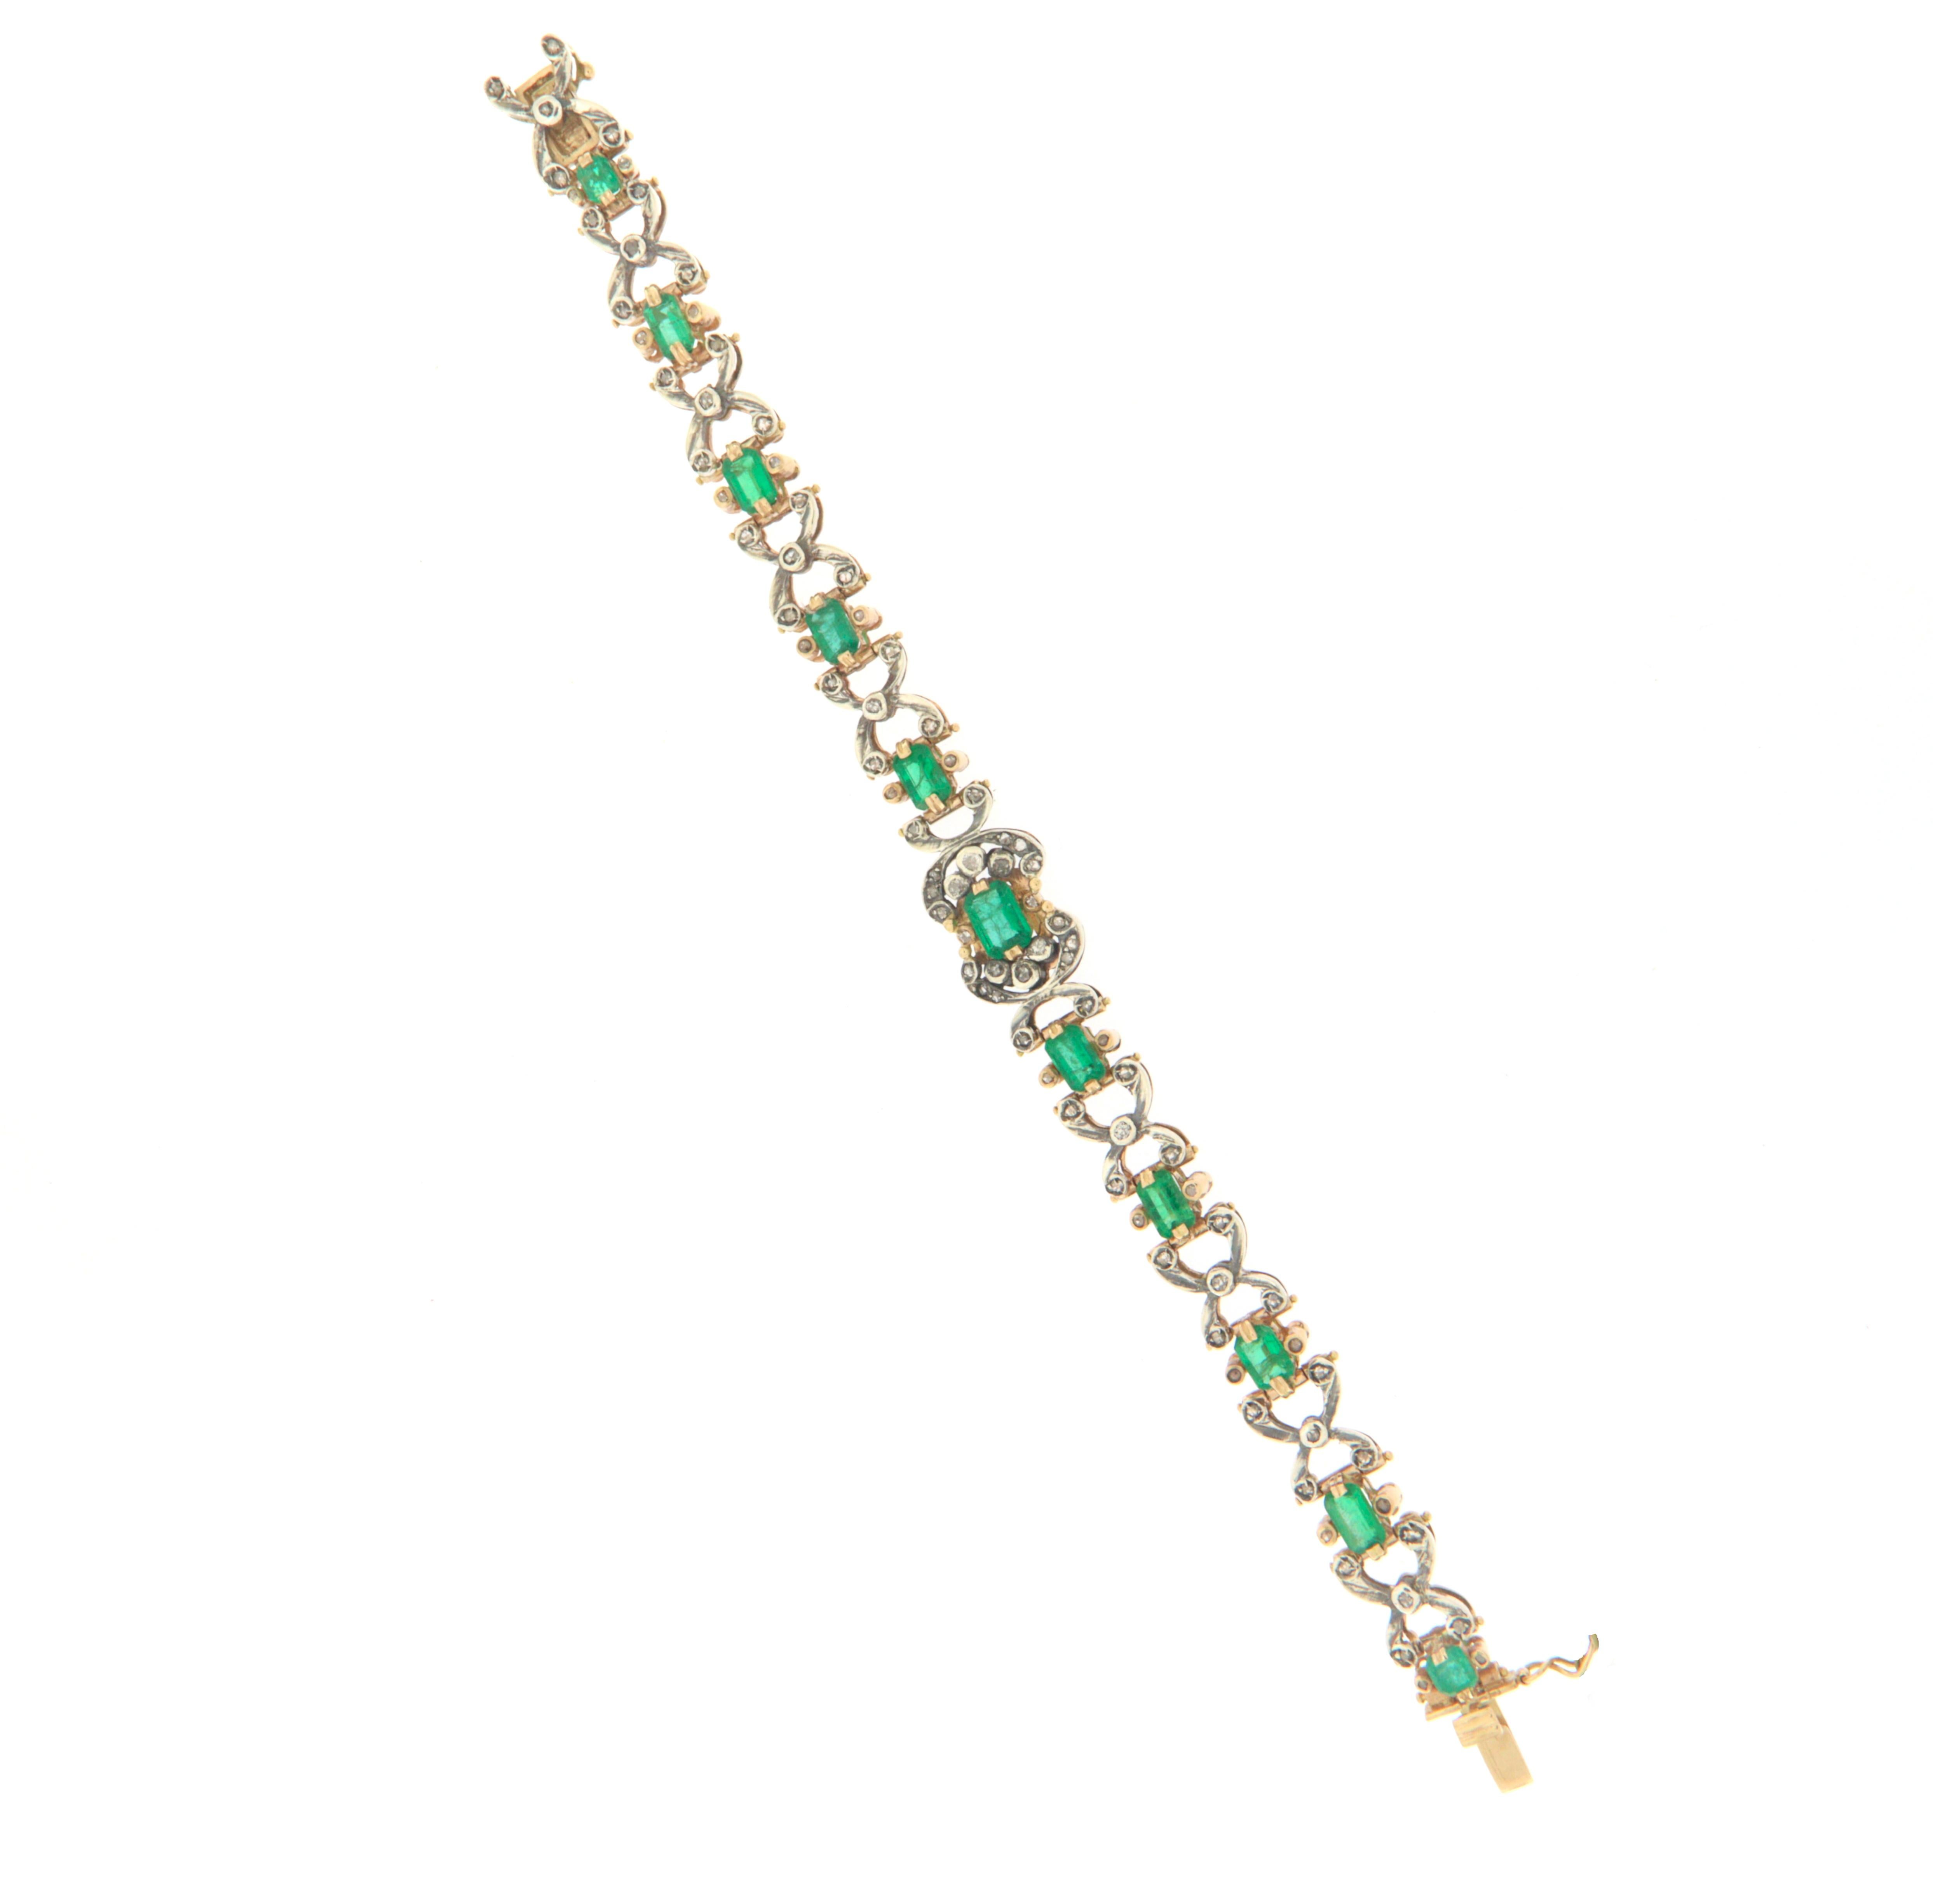 Spectacular soft bracelet made entirely by hand by our artisans in 14 karat yellow gold and silver in the upper part studded with old cut diamonds and Brazilian emeralds with Minor oil.

The bracelet has a total weight of 24.50 grams

The weight of